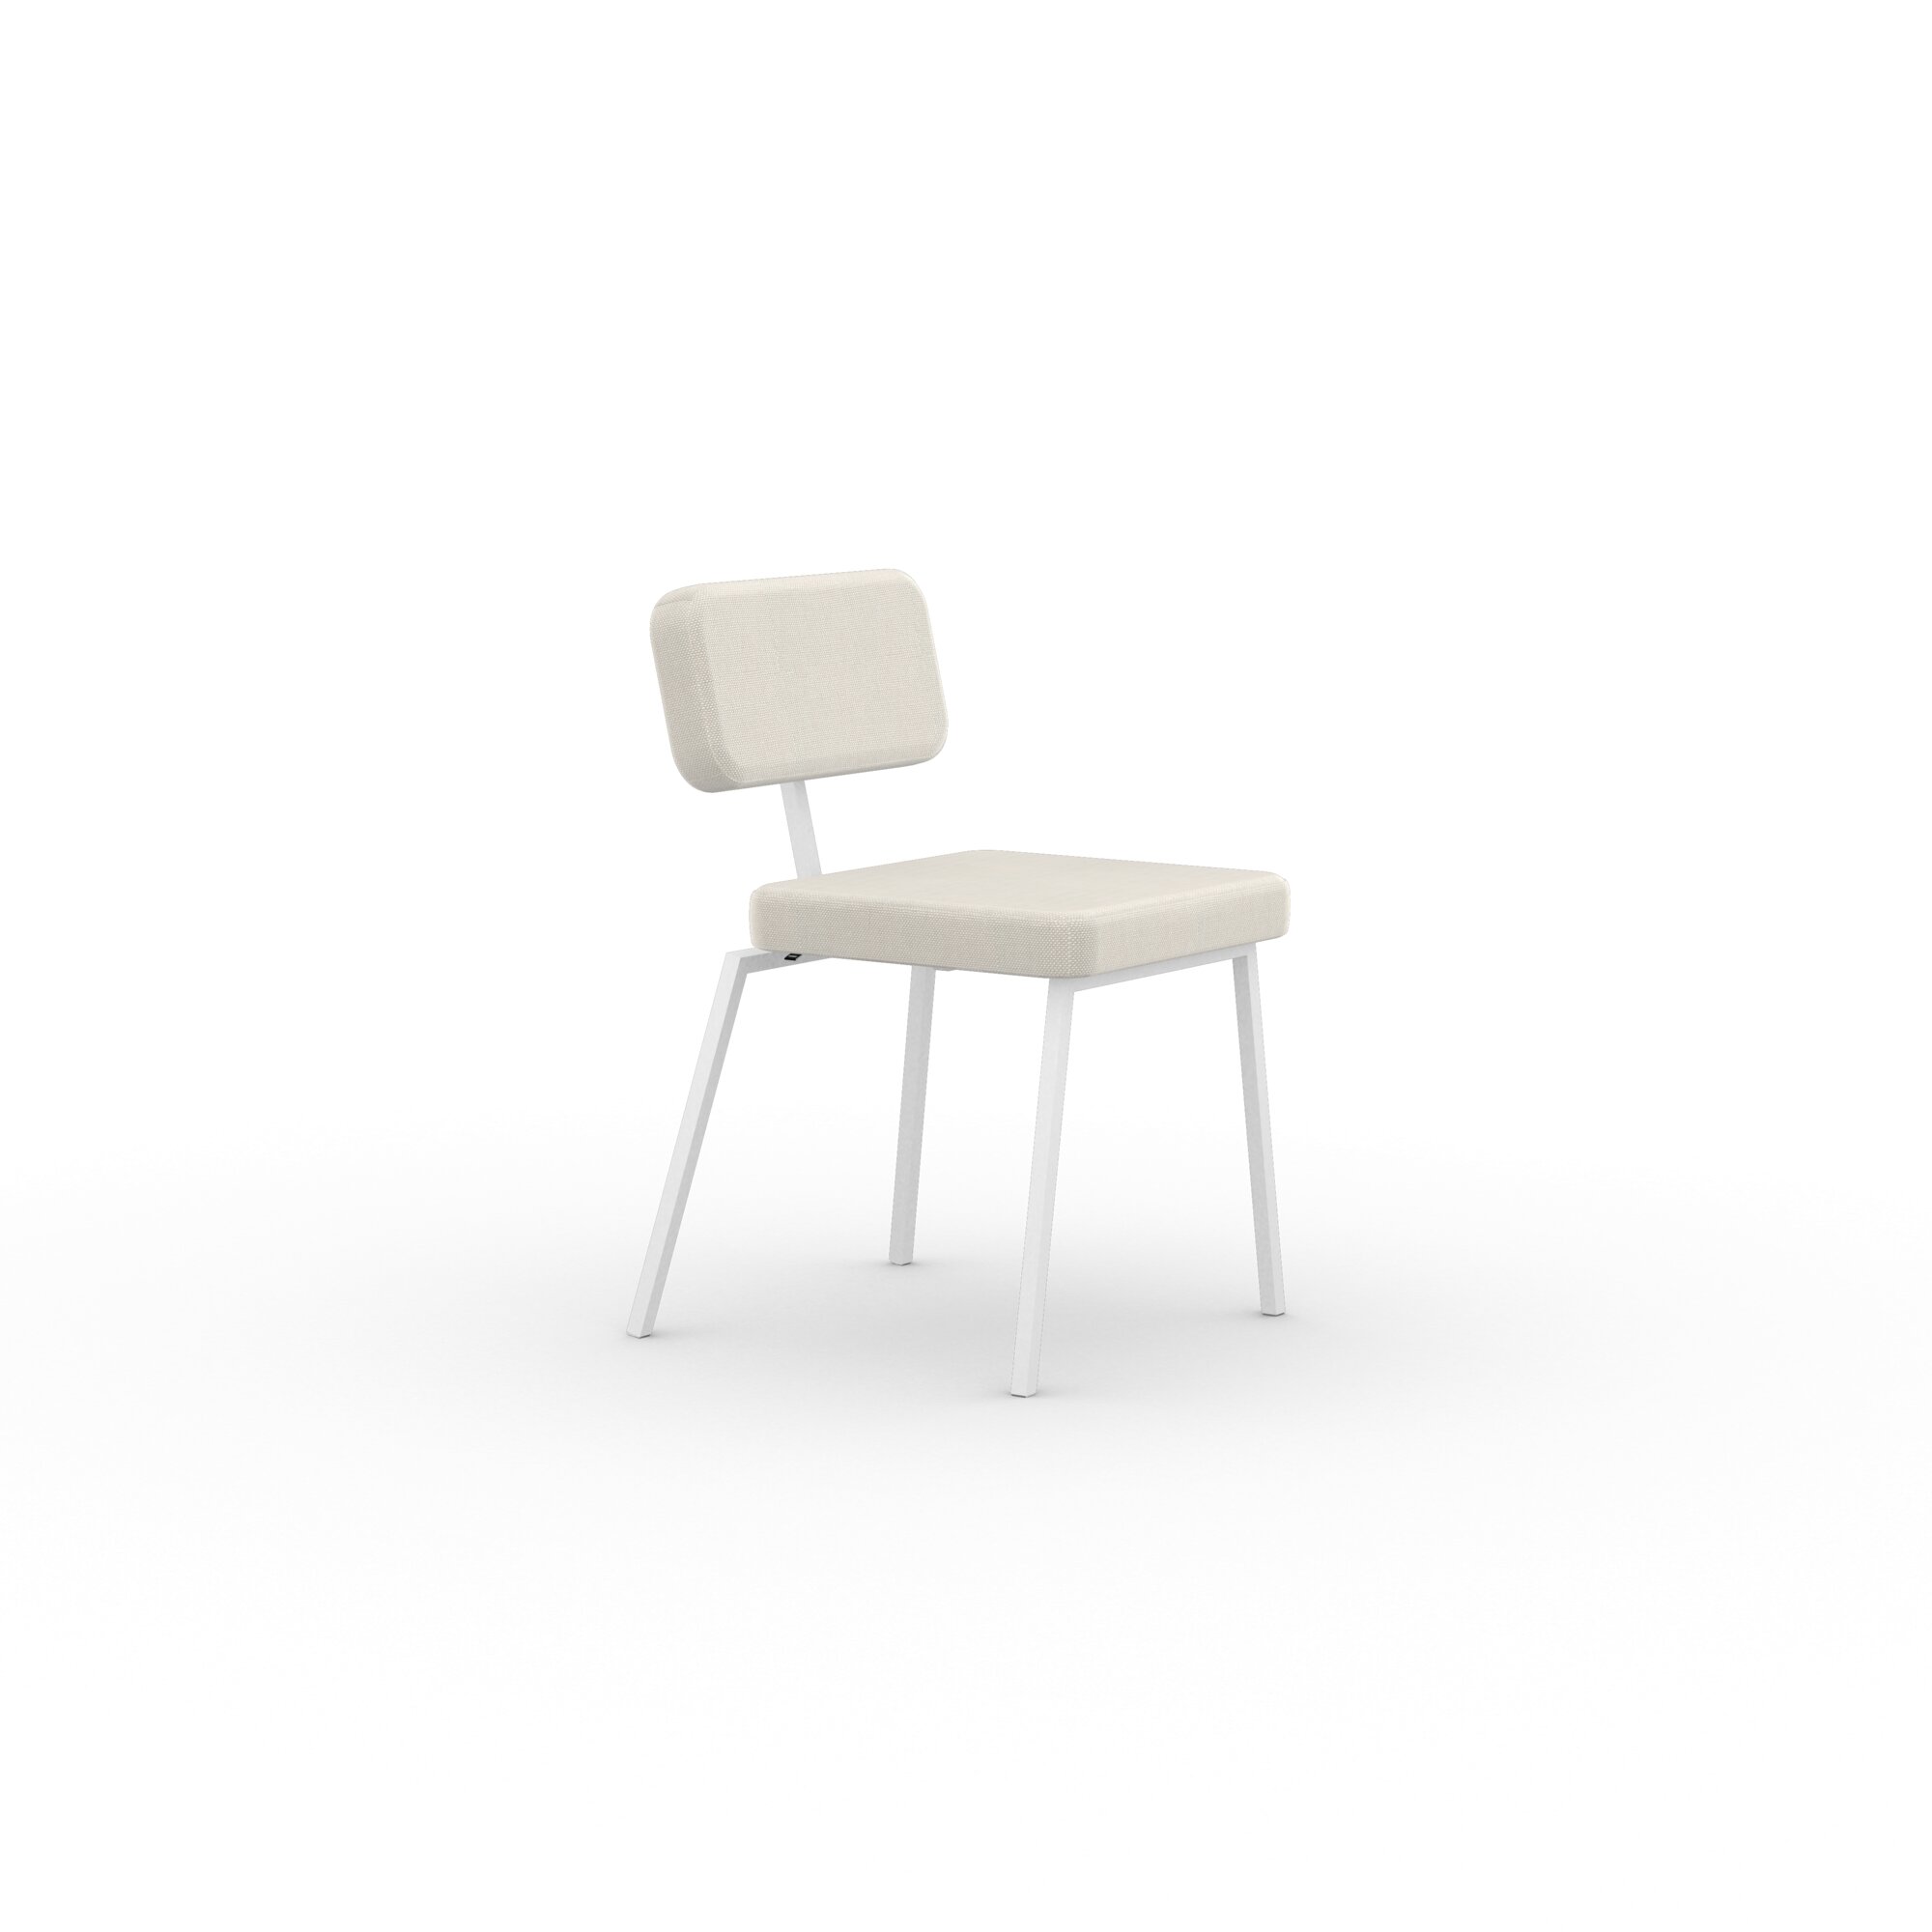 Design modern dining chair | Ode Chair without armrest  calvados multibeige9995 | Studio HENK| 